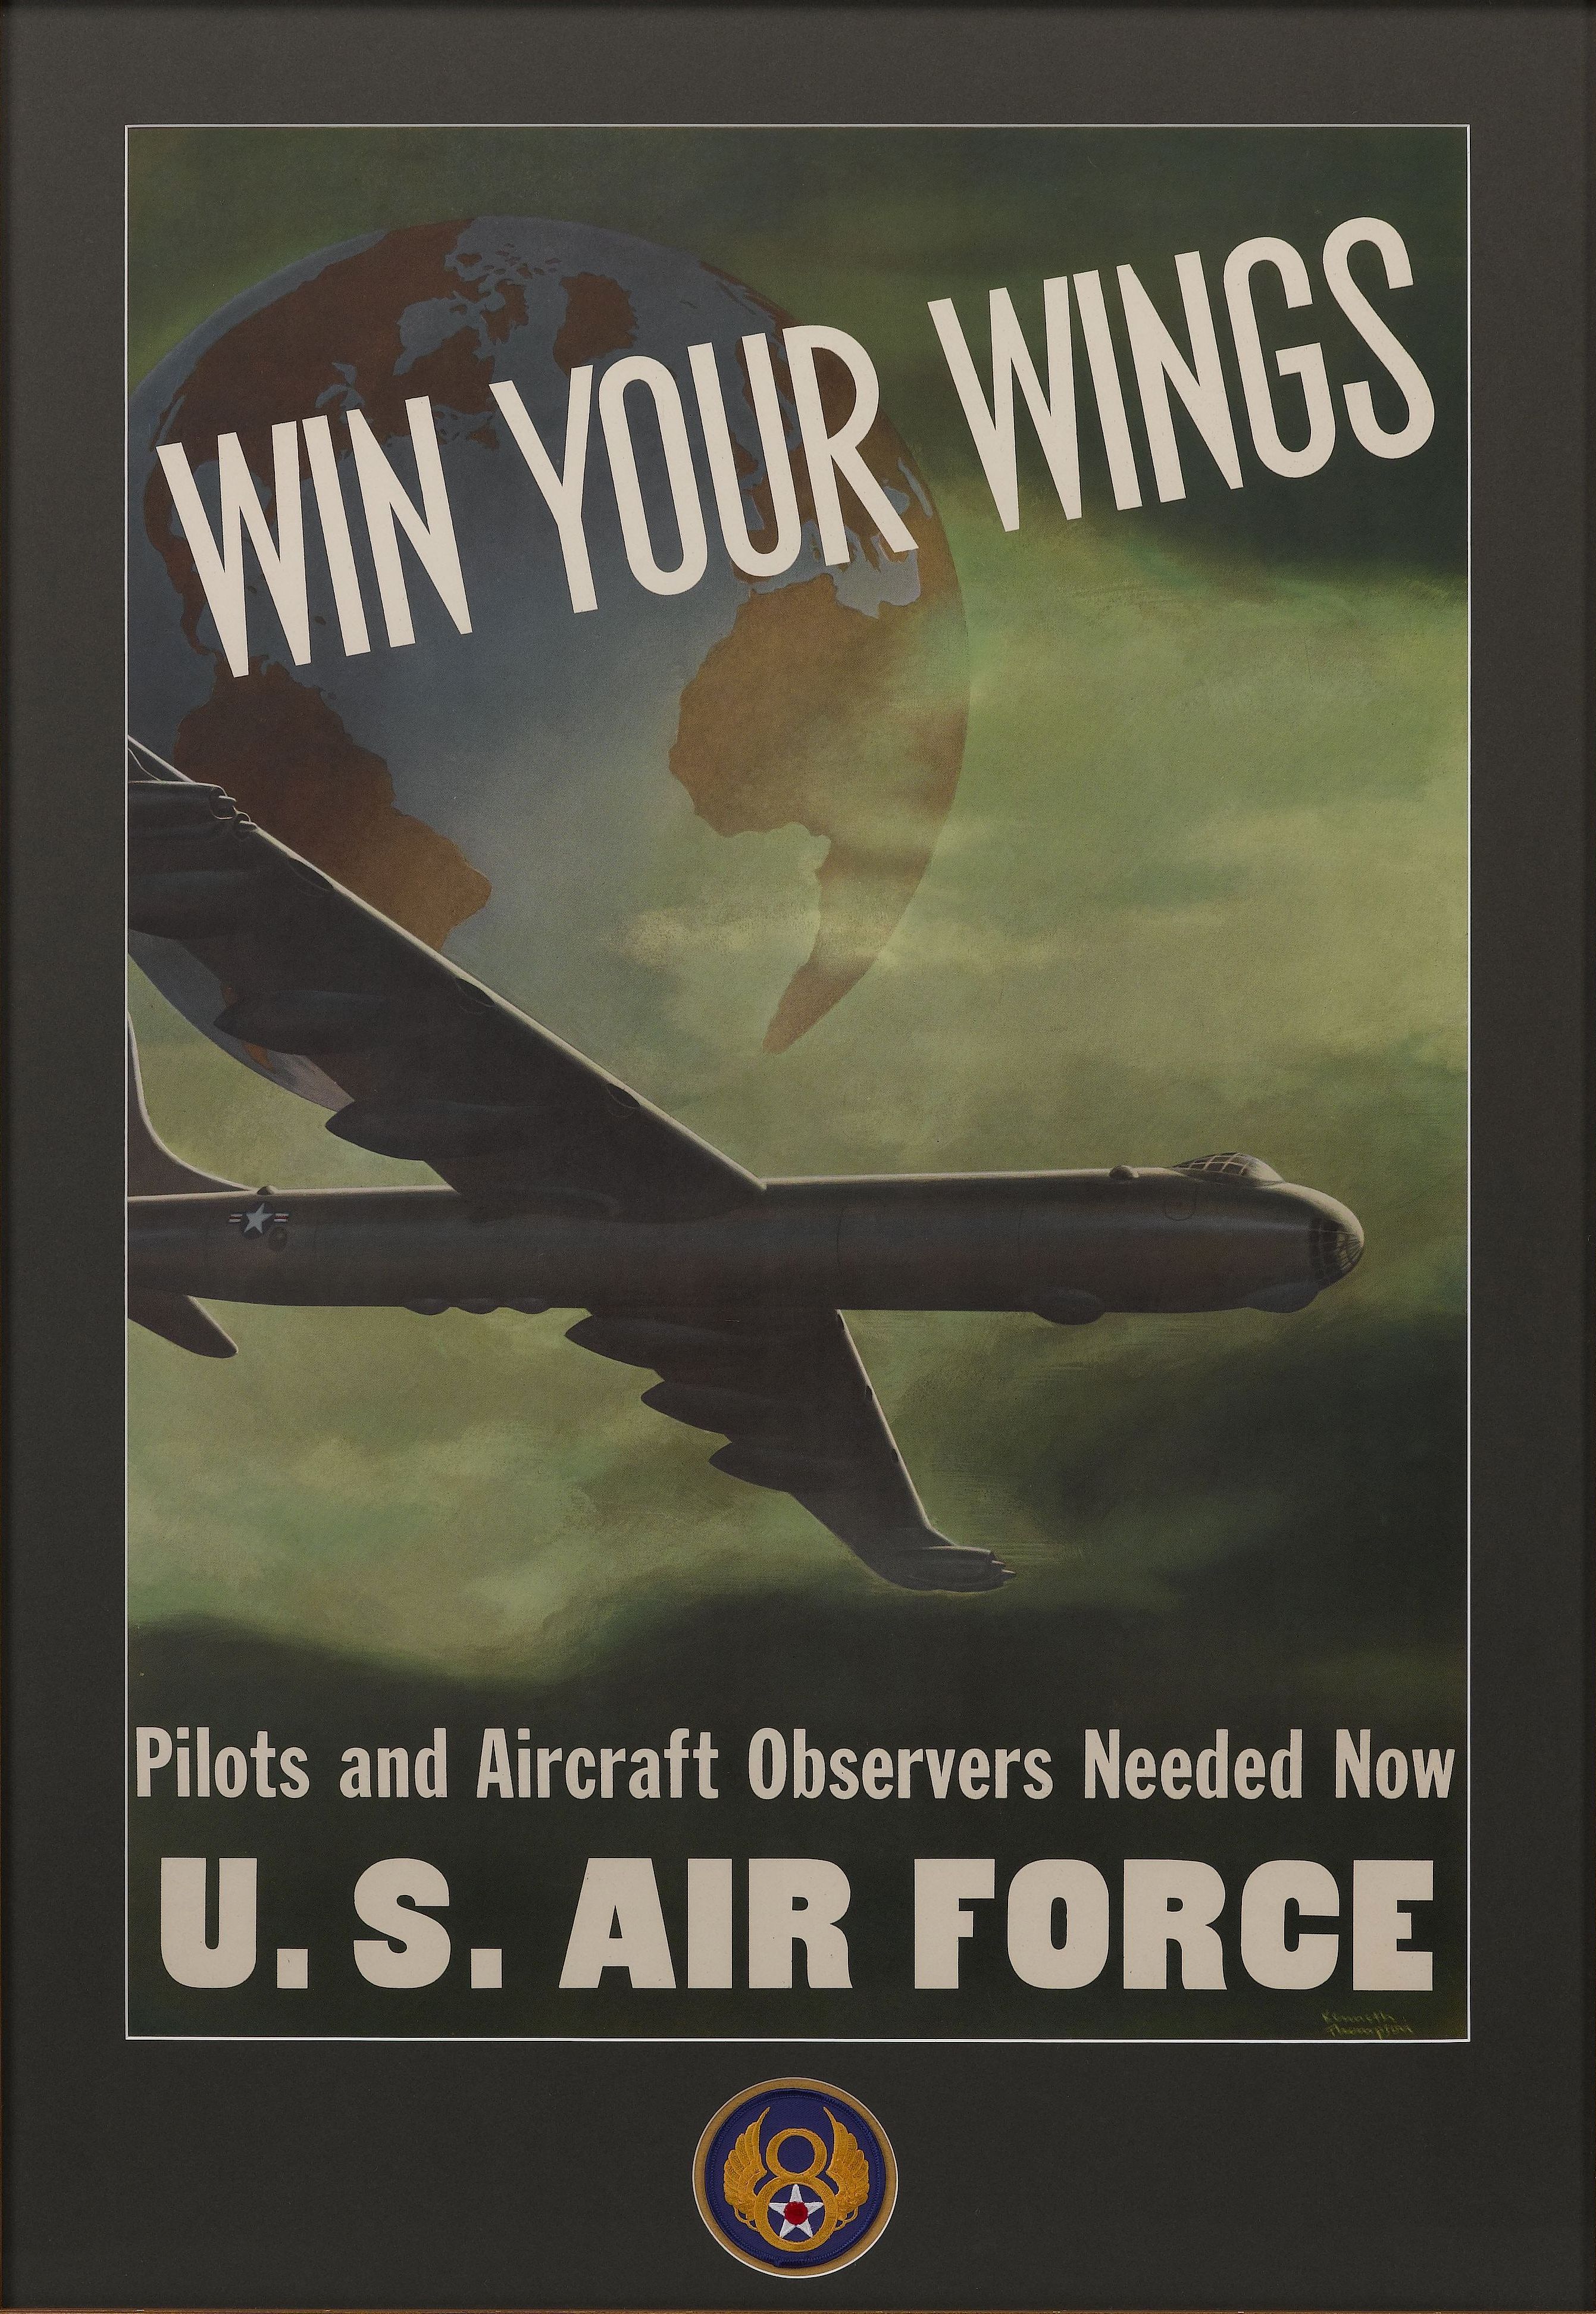 Cold War US Air Force Boeing B 52 Stratofortress Poster Boeing B 36 Peacemaker 2682x3888